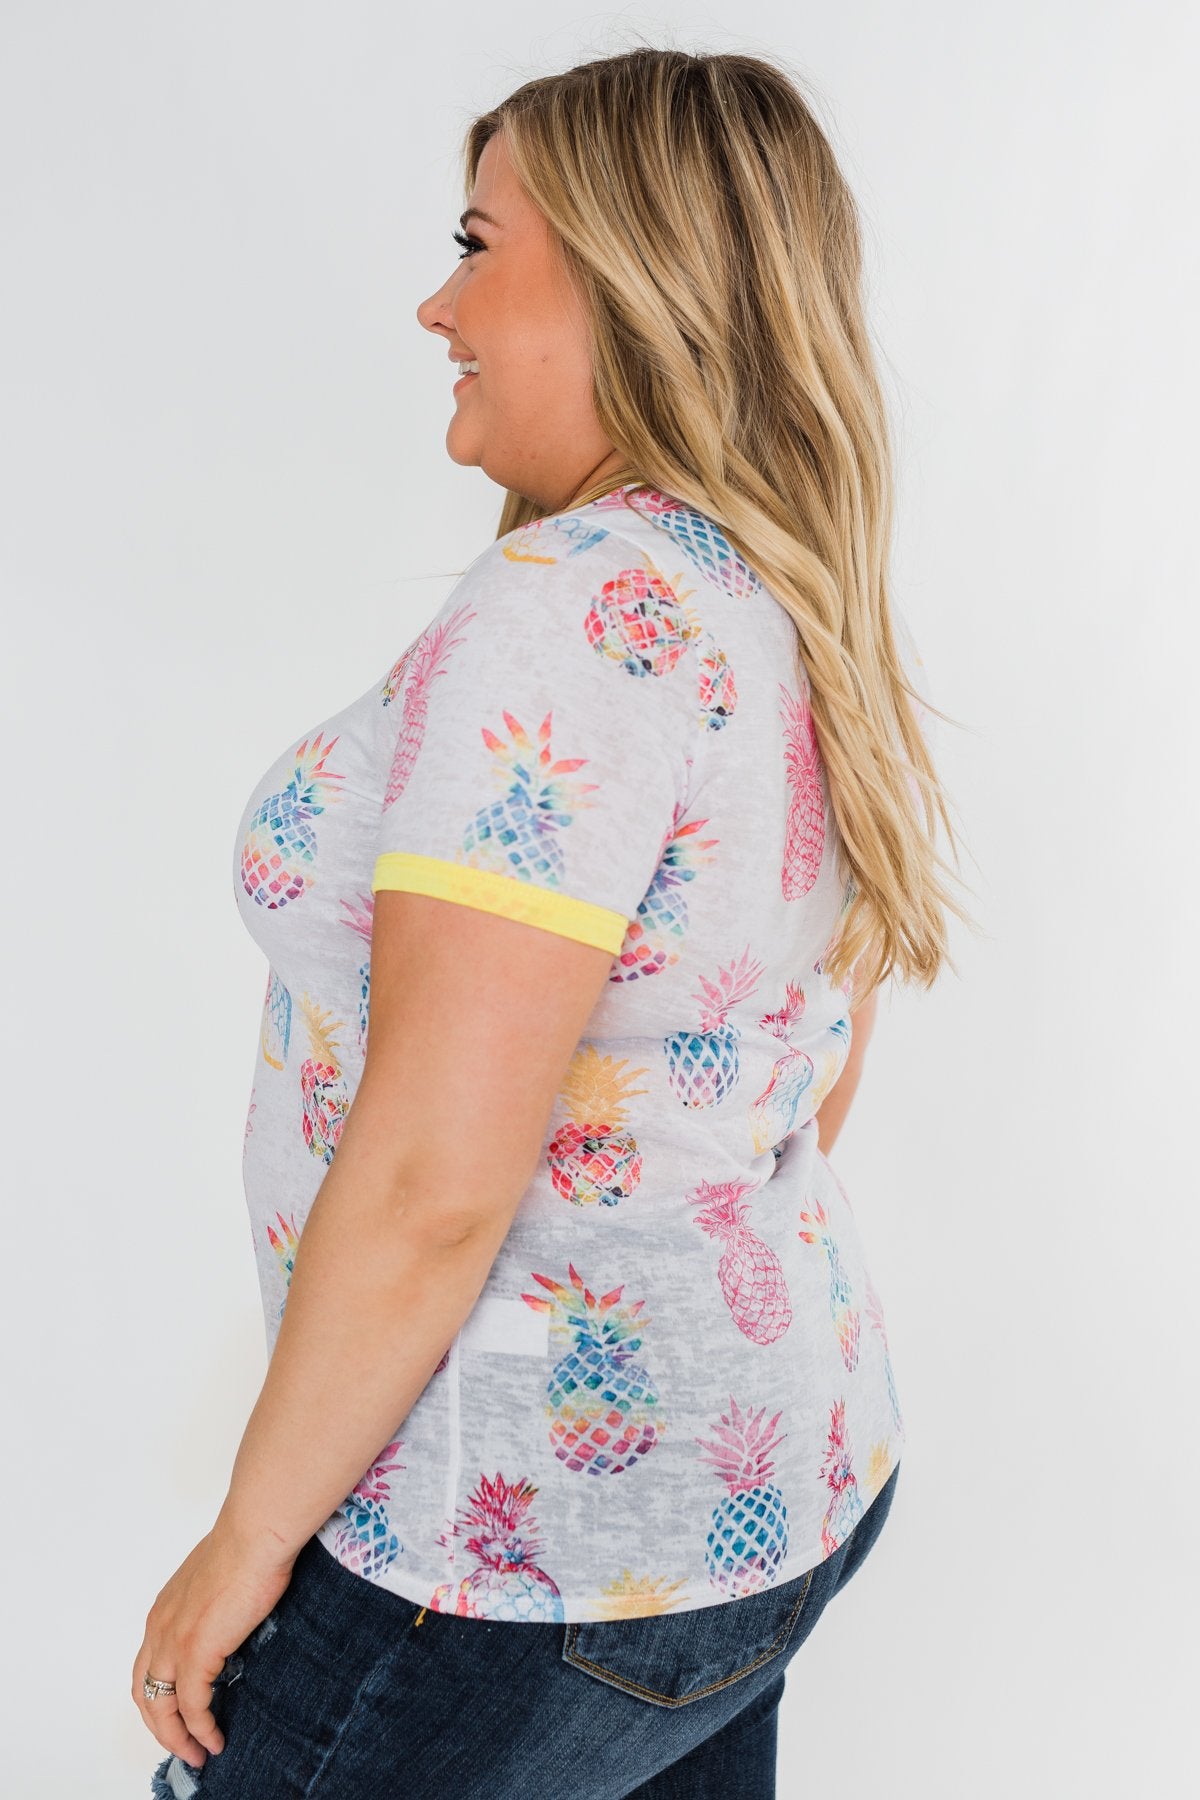 Stand Tall Pineapple Top- Yellow